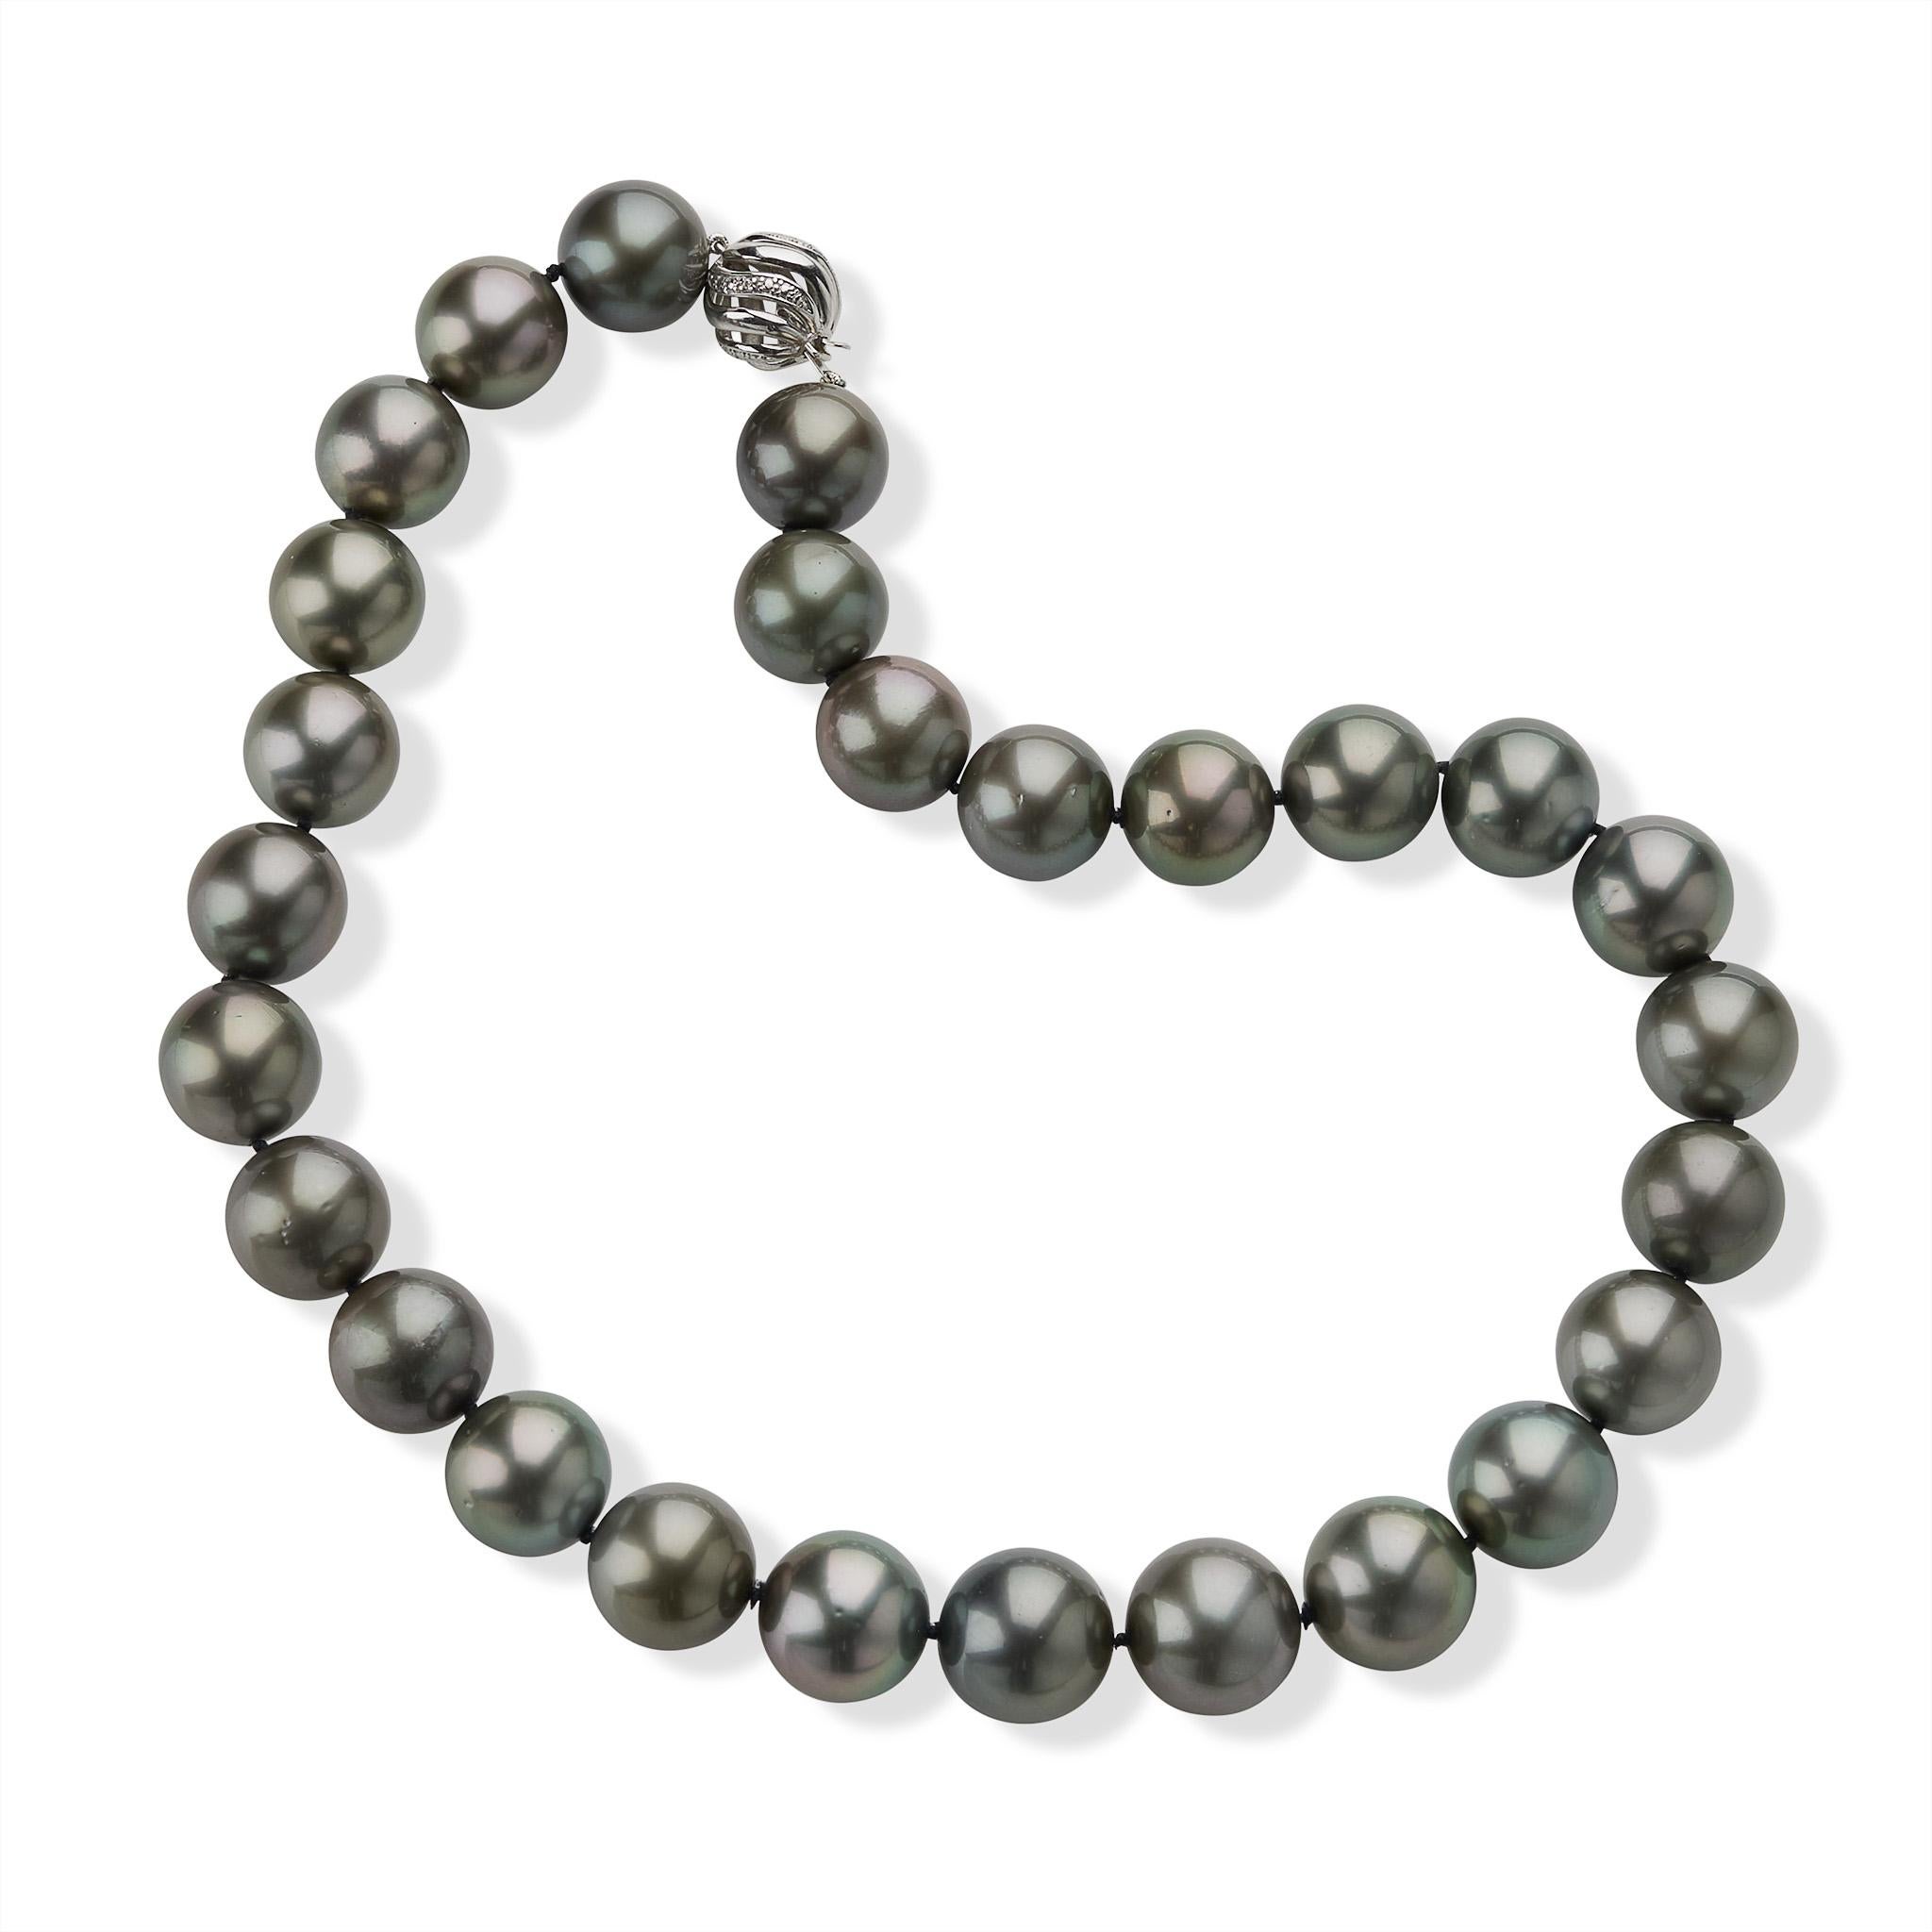 This contemporary necklace is composed of 27 cultured round Tahitian pearls, measuring approximately 16.70 x 15.00mm. The necklace of natural color silvery, gun metal pearls with subtle rose tones is completed by a 14K white gold swirl-motif boule